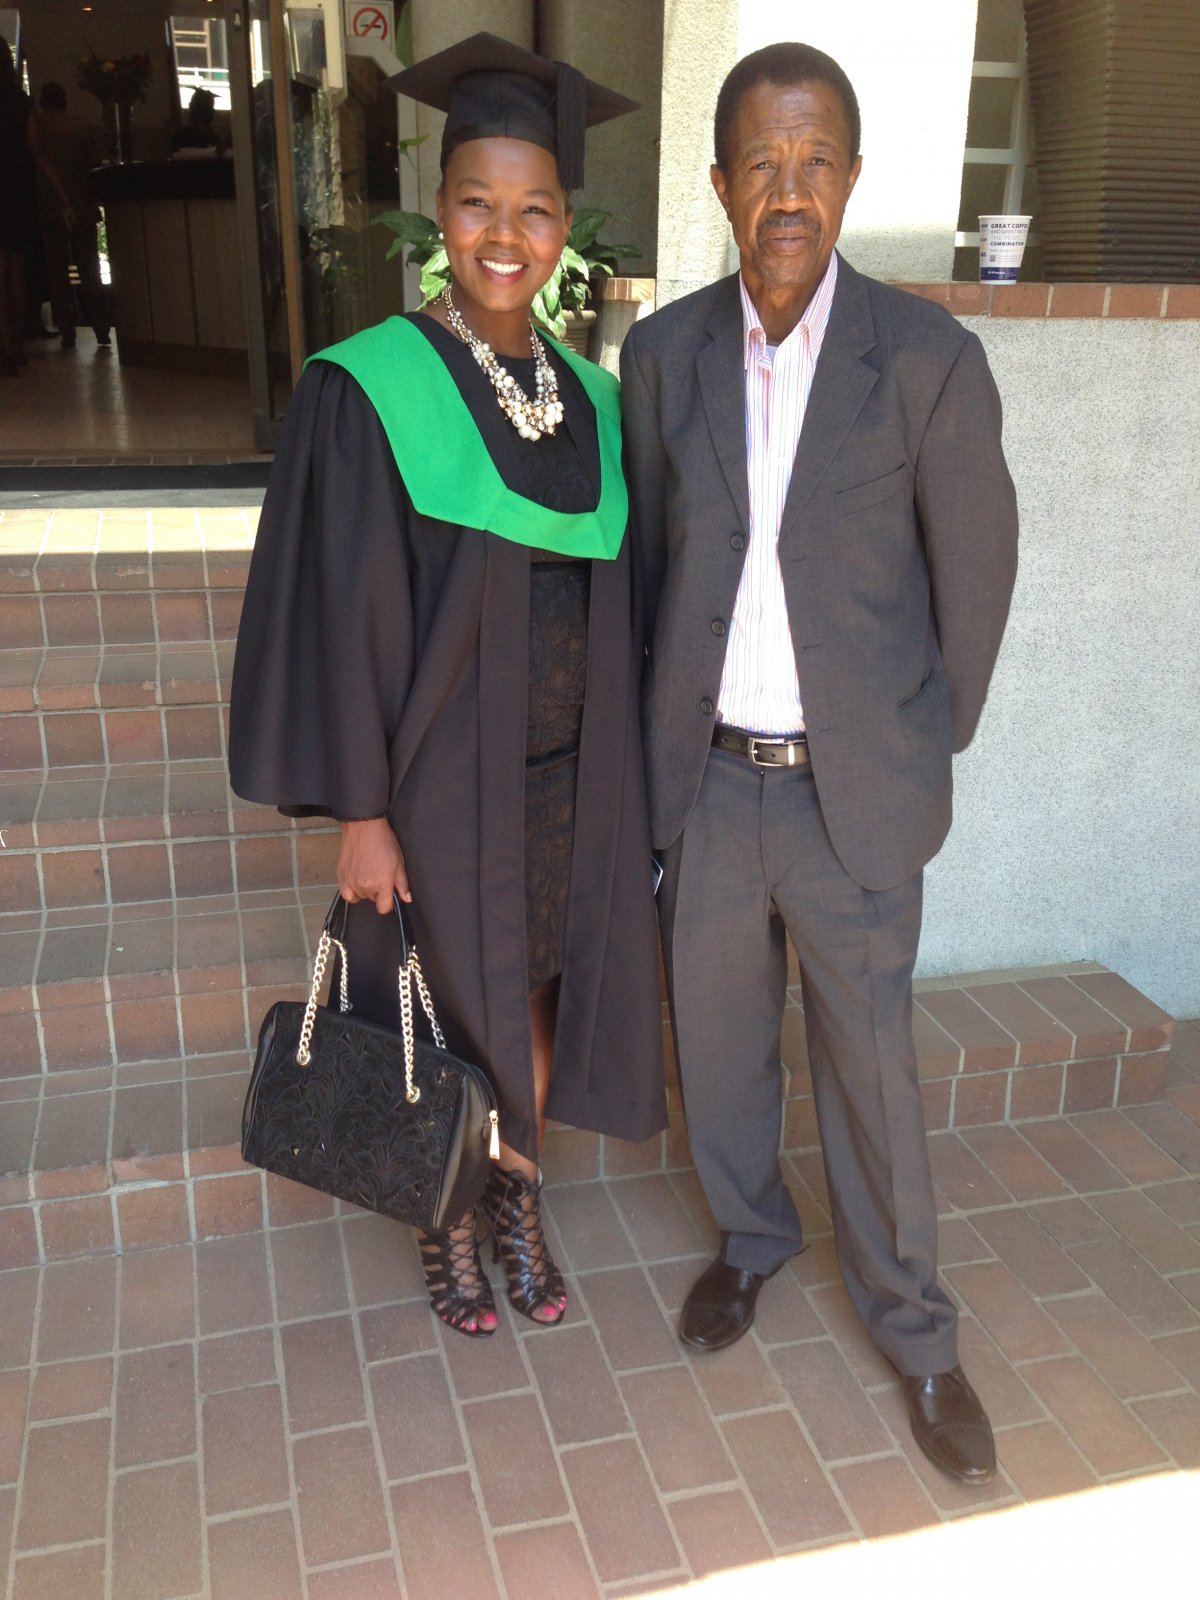 flanked by my father at Regenesys Business School.